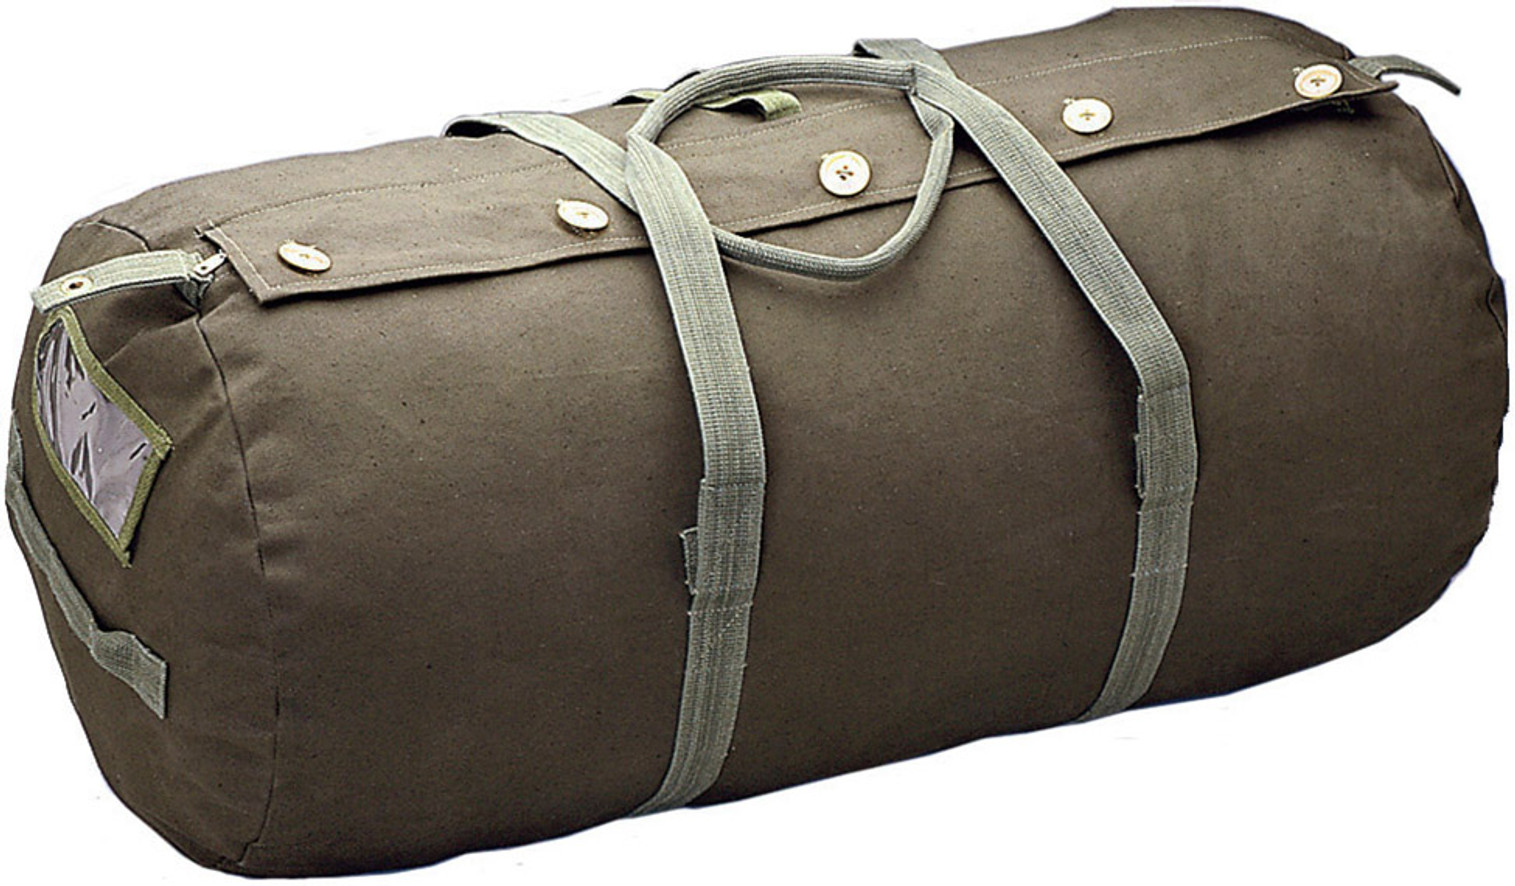 World Famous Canadian Military-Style Canvas Paratrooper Bag